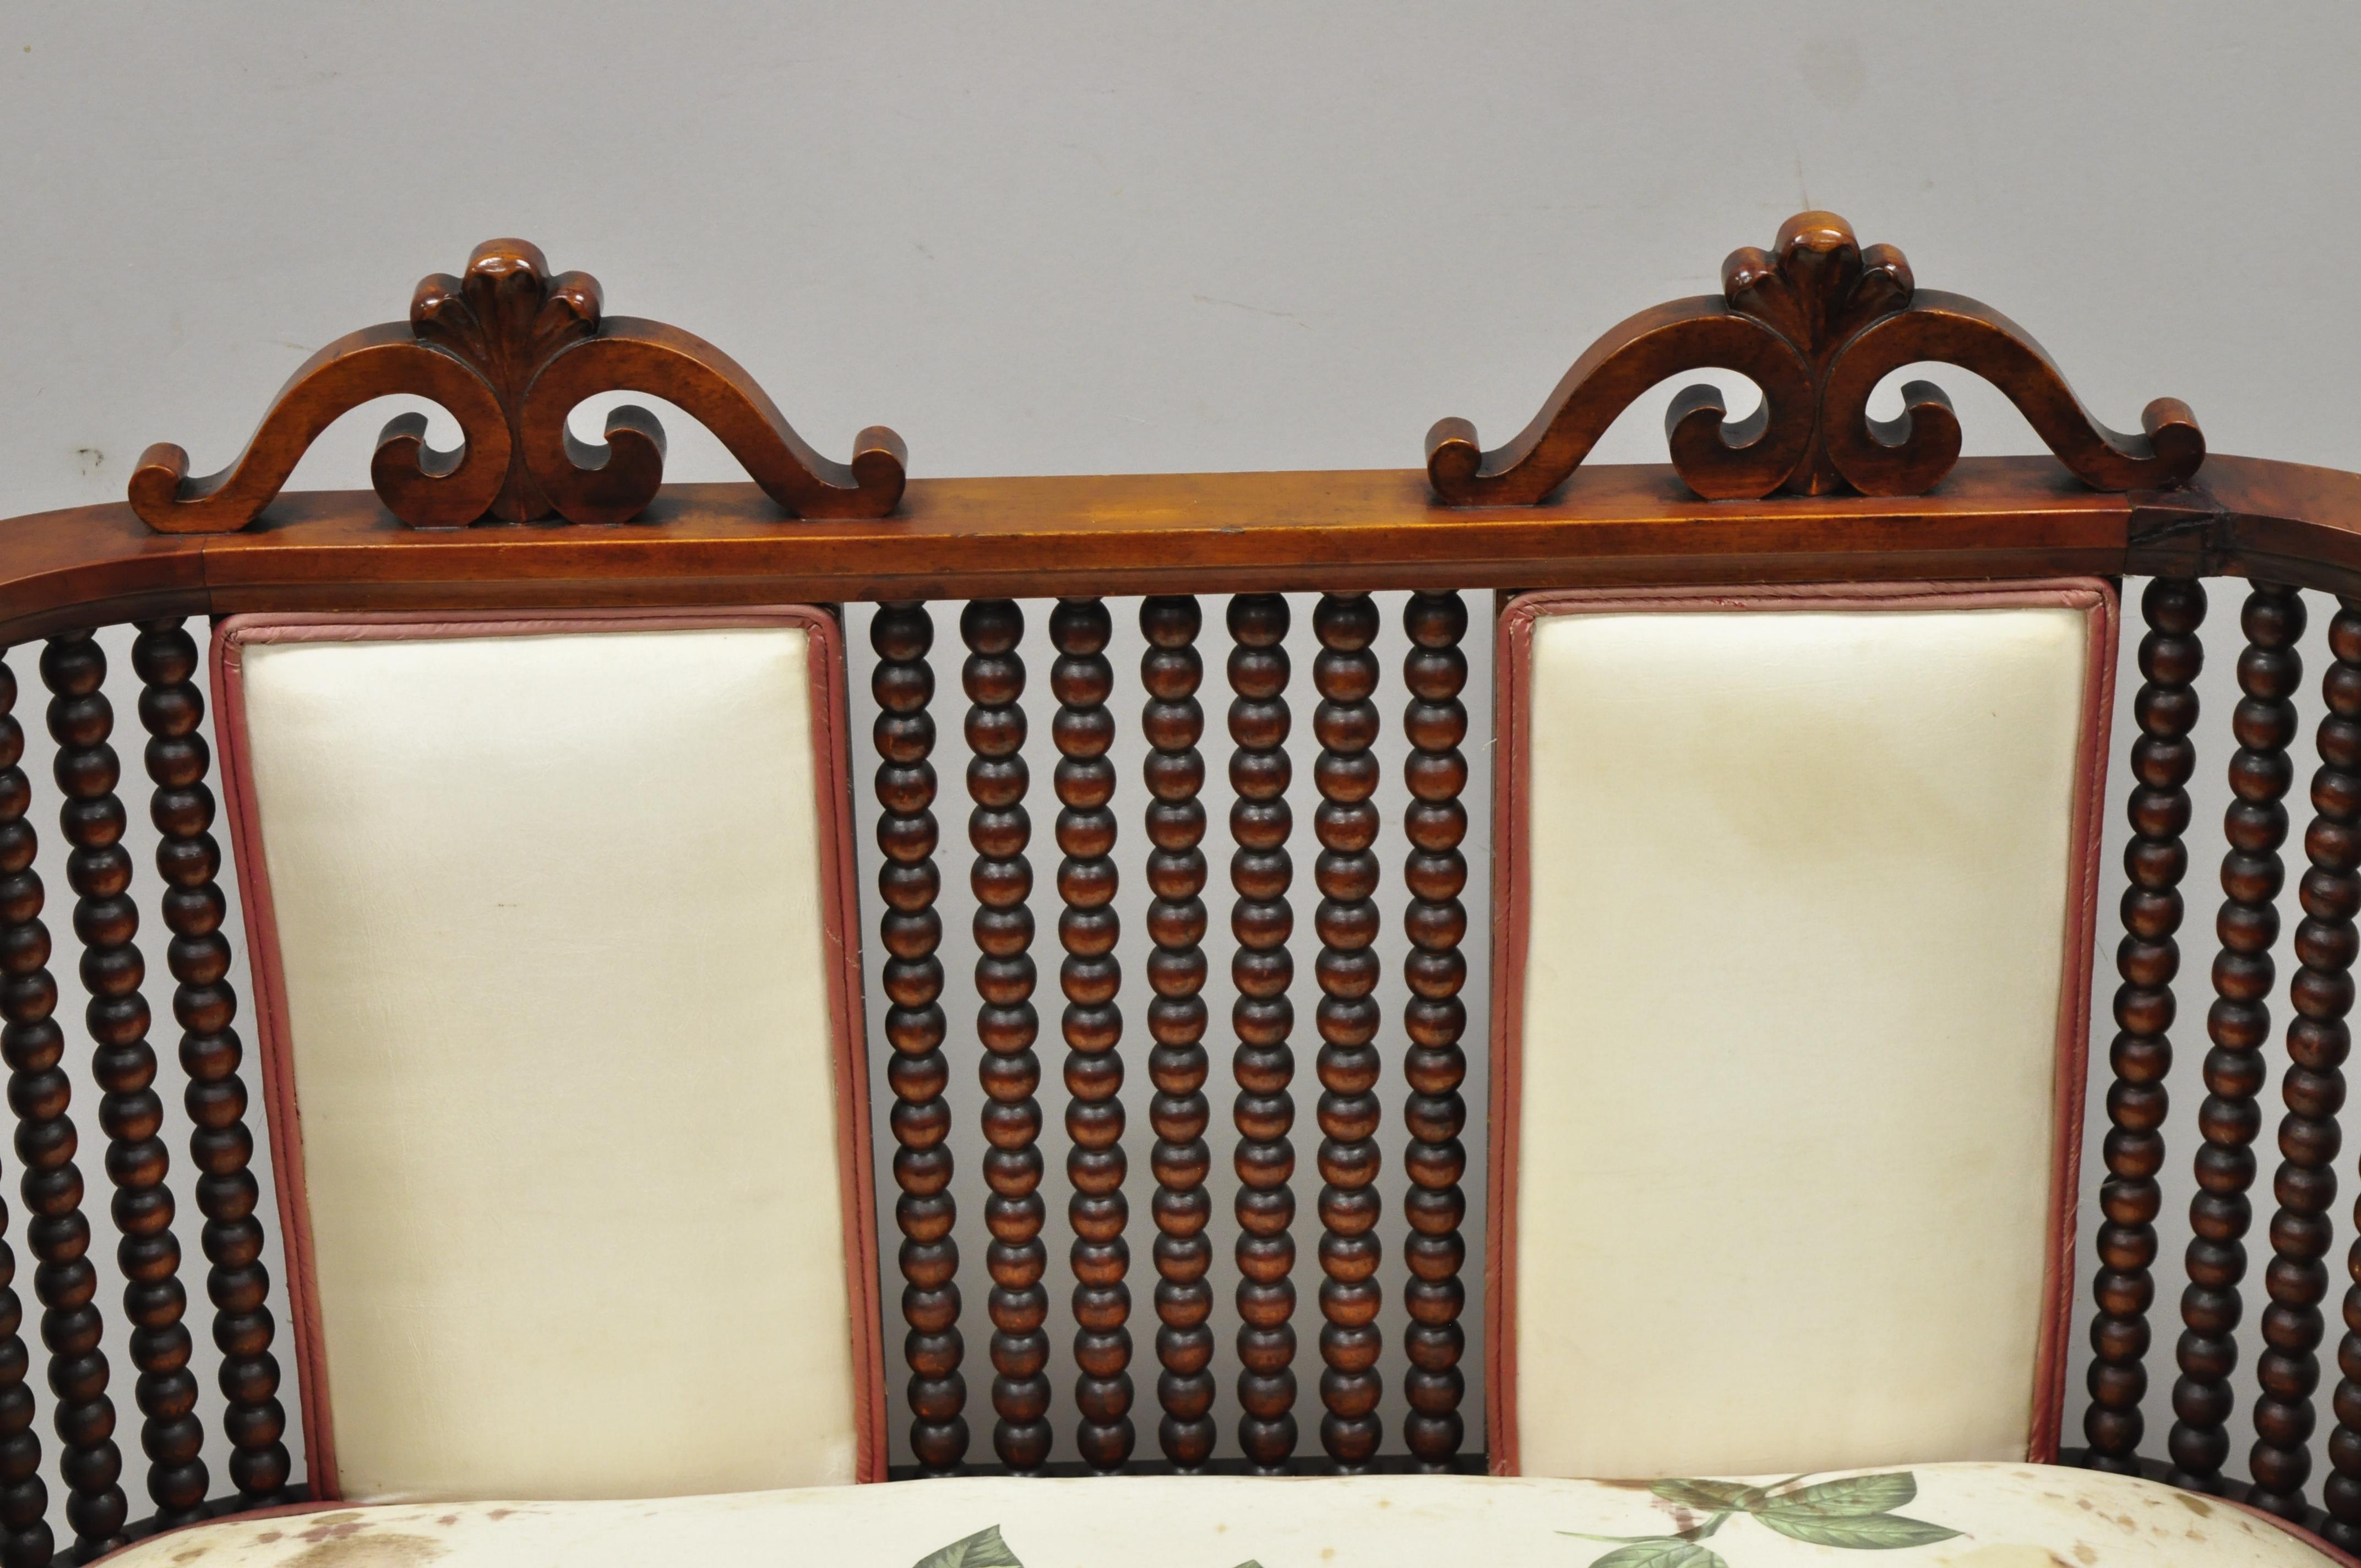 Antique Victorian mahogany upholstered Victorian spool spindle bench loveseat. Item features 